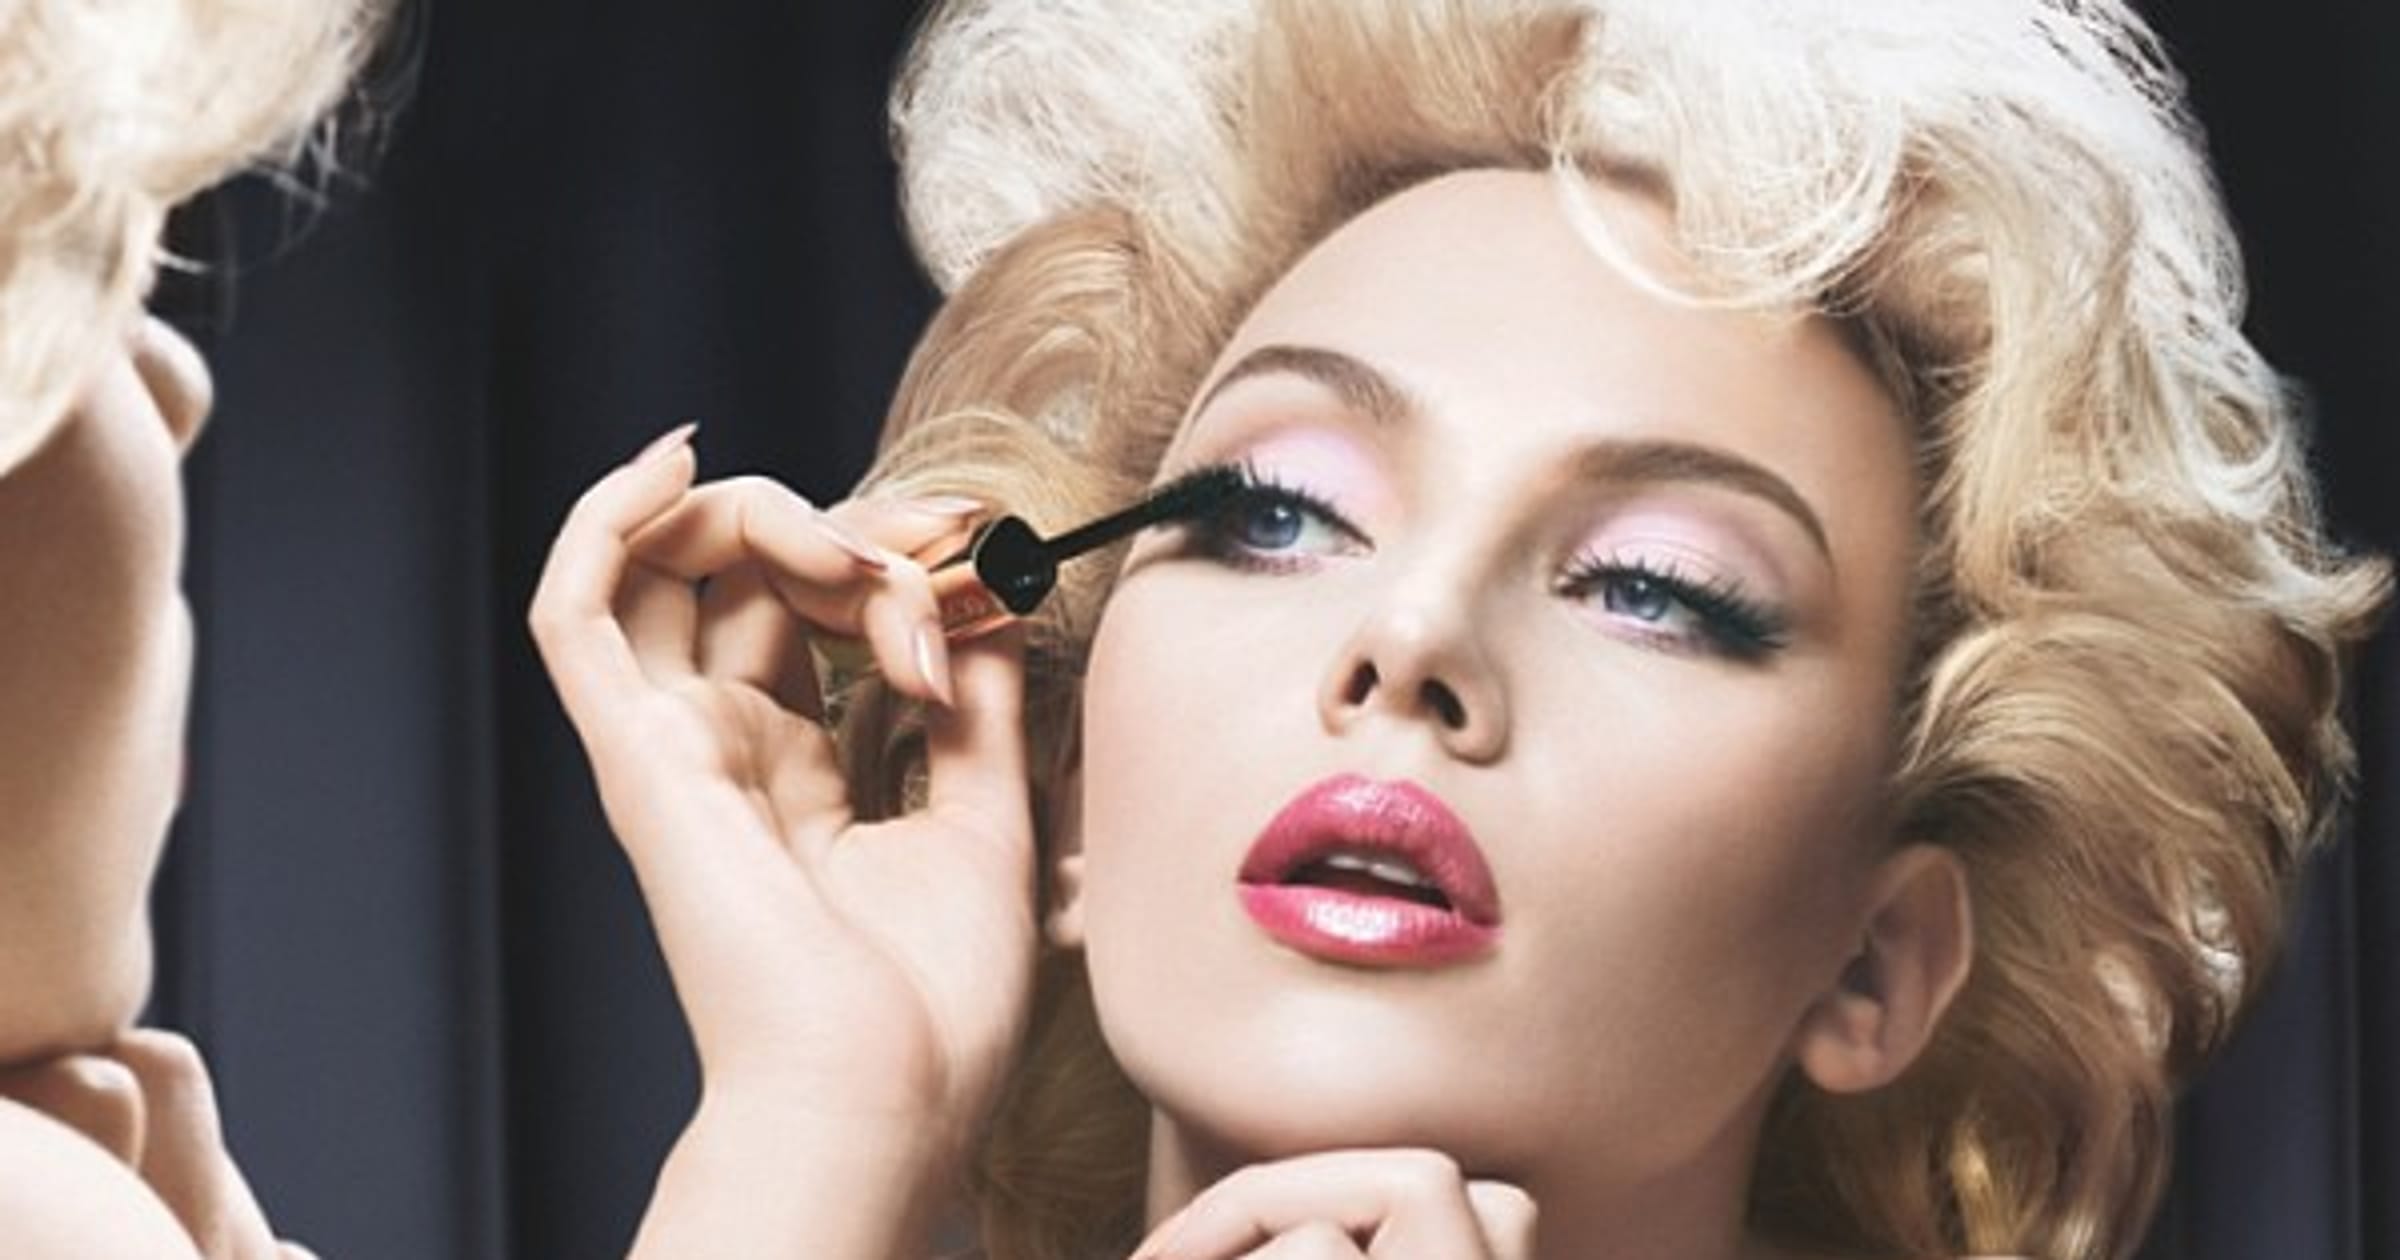 Famous Makeup Artists: List of The Top Makeup Artists in Their Field